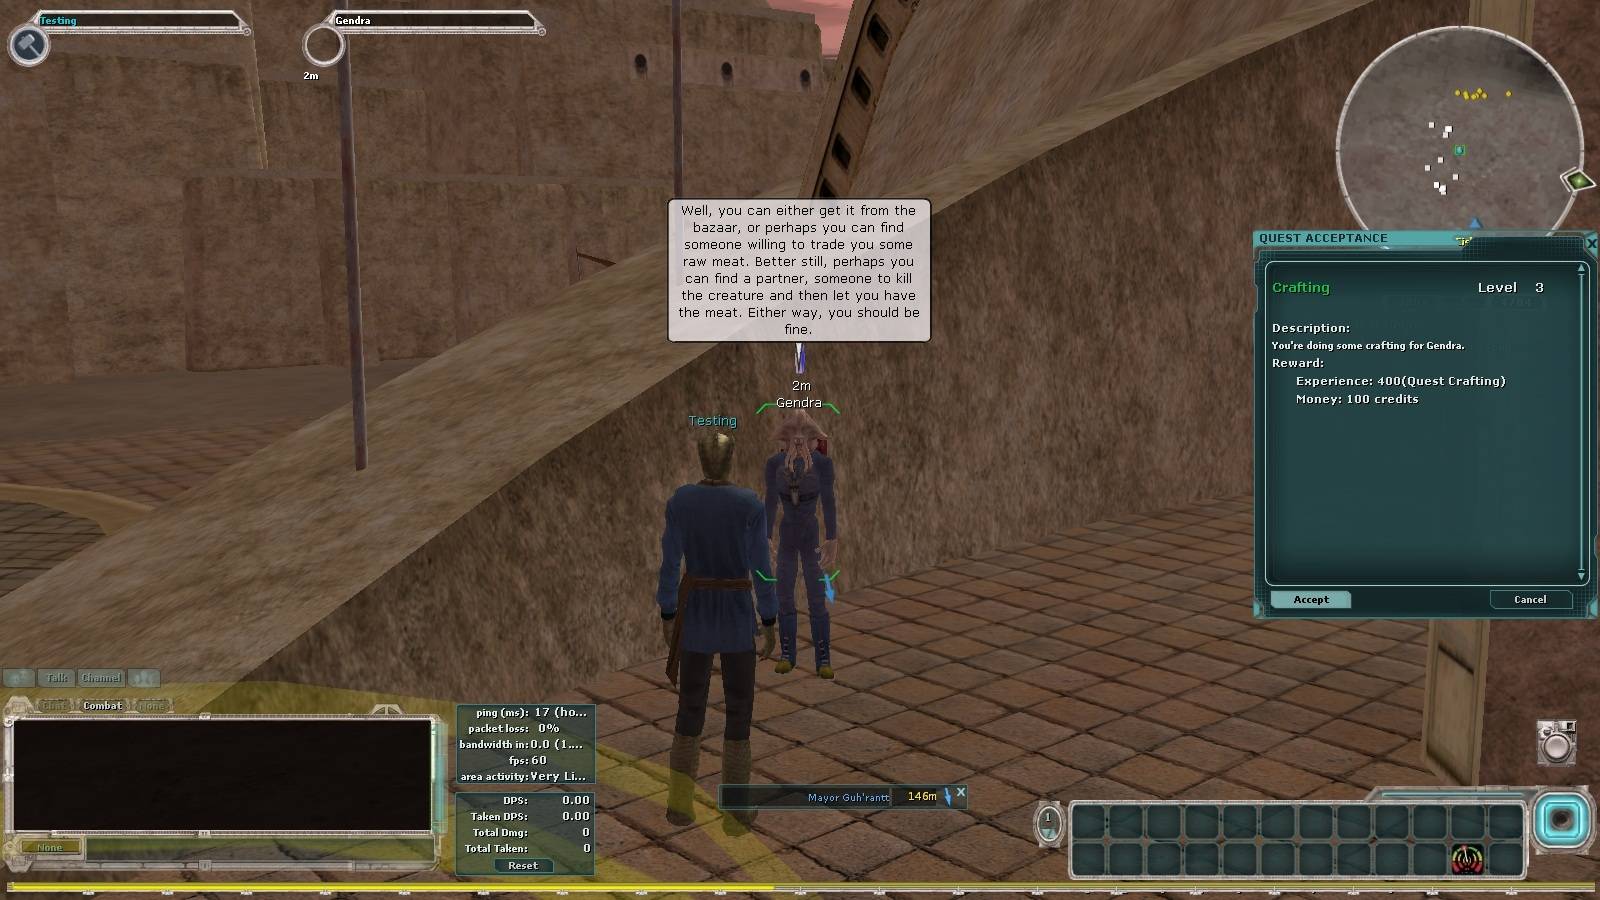 pMC43lX - [Release] Star Wars Galaxies Official Source Code (Client/Server) - RaGEZONE Forums